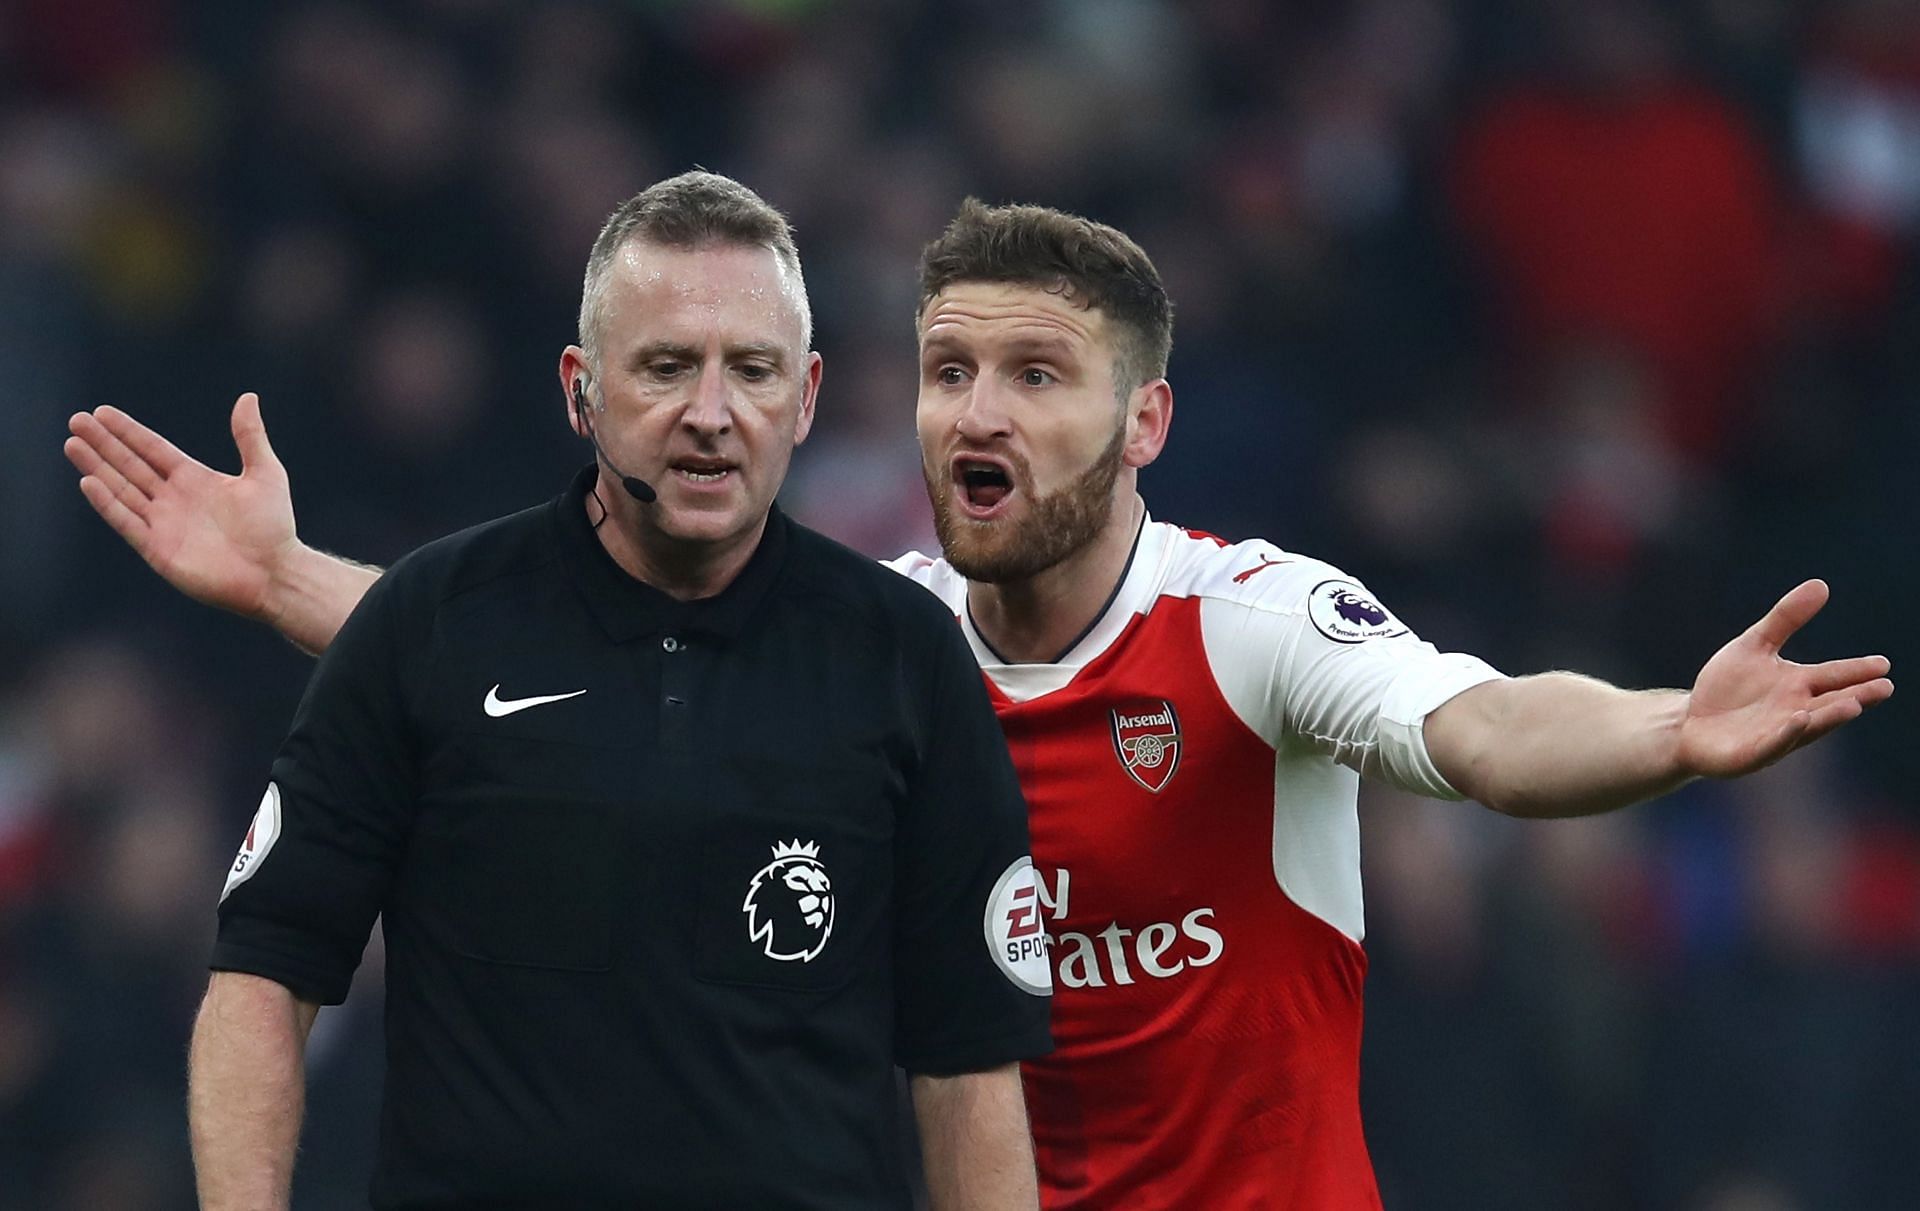 Mustafi made comical errors throughout his time with the Gunners